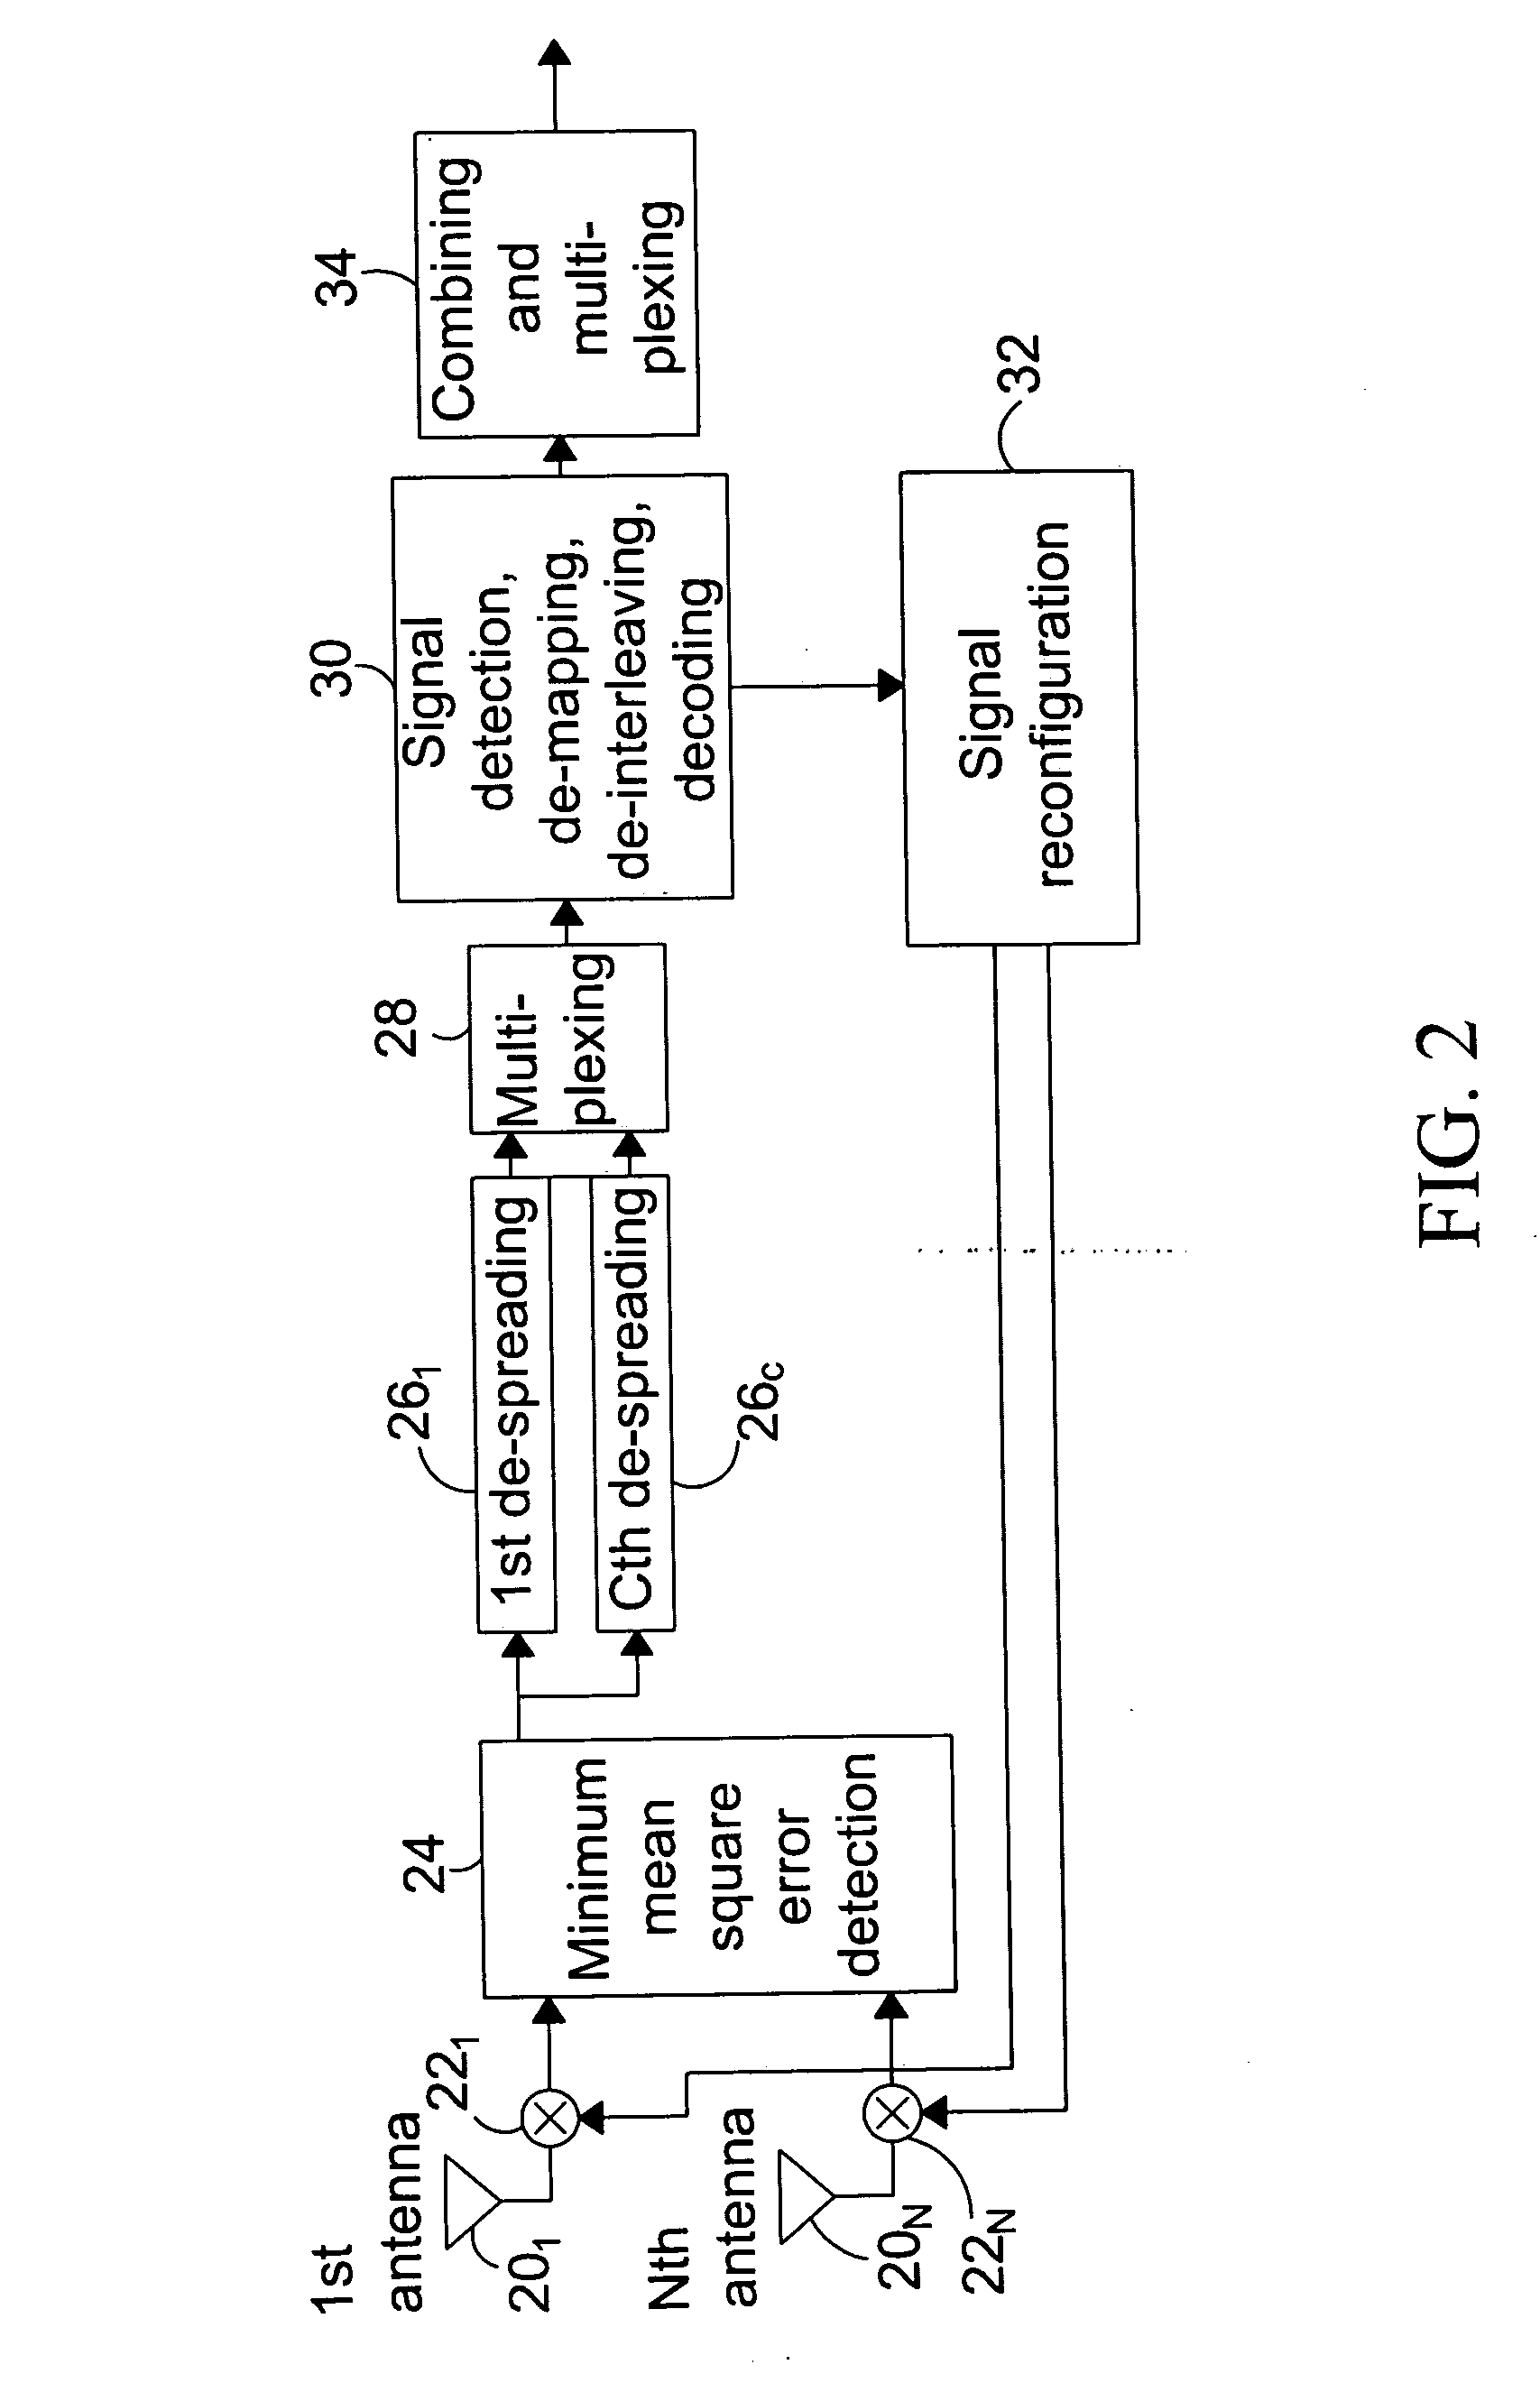 Method of controlling signal transmission in Multi-Input/Multi-Output system